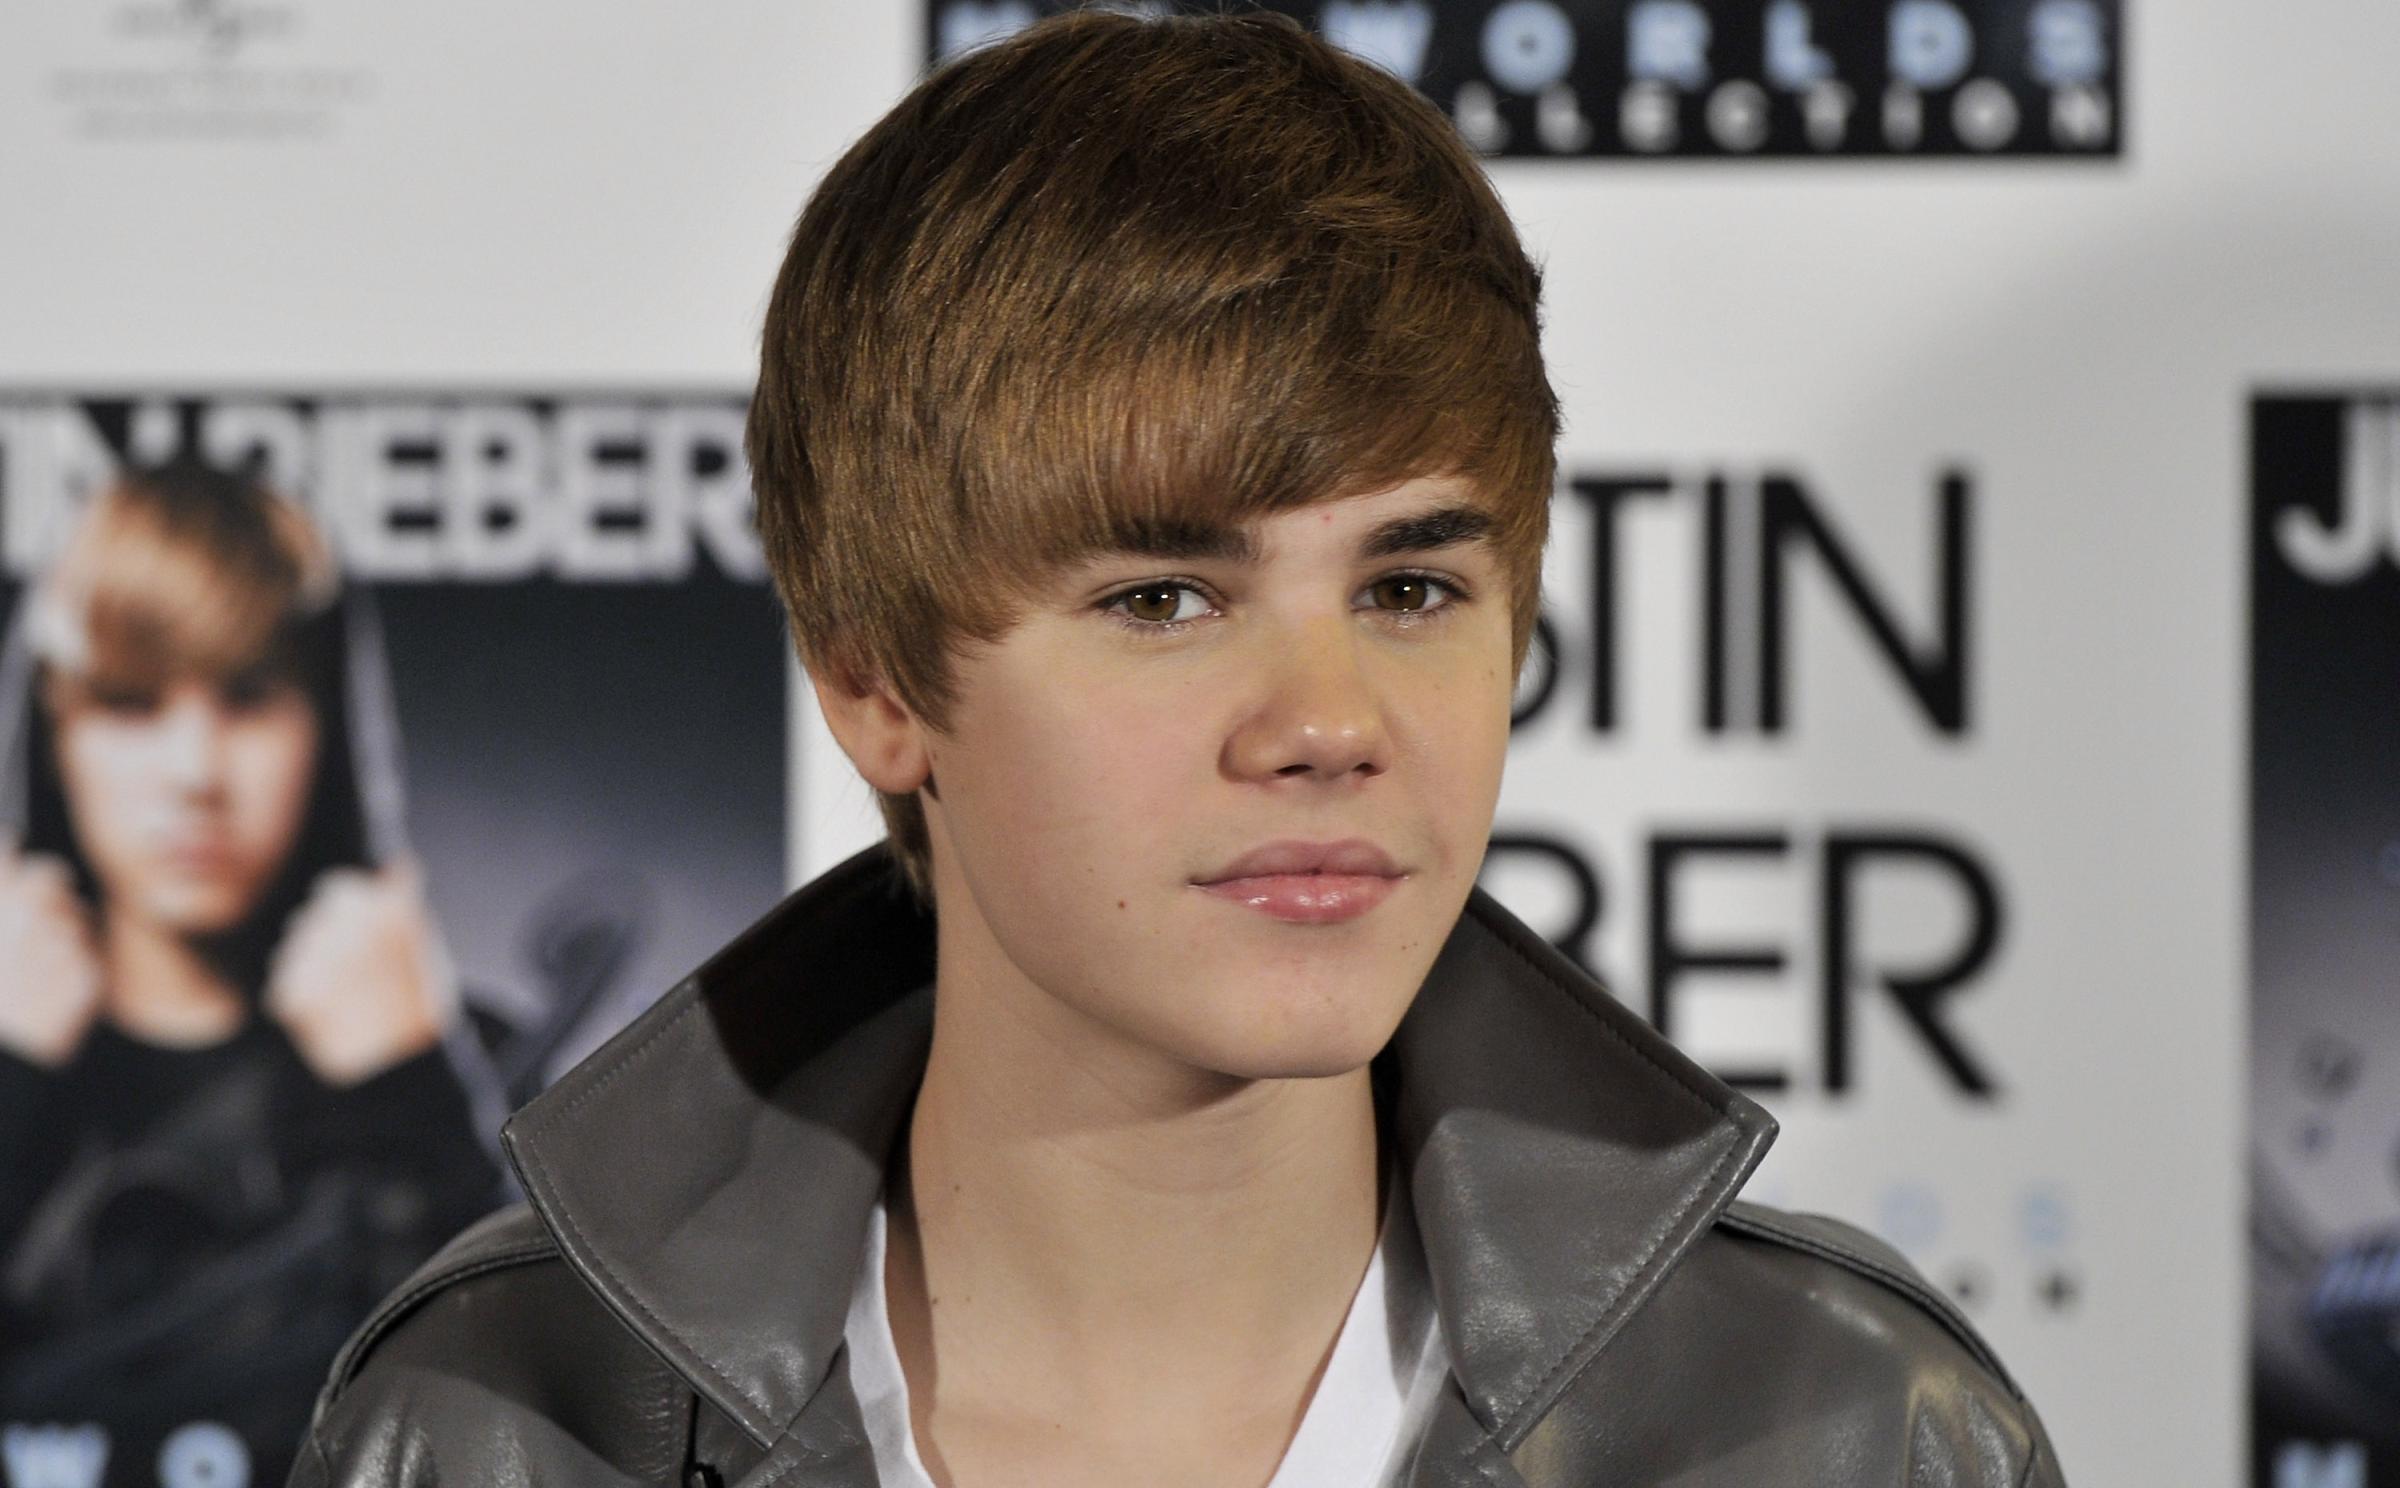 Justin Bieber Attends 'My Worlds The Collection' Photocall in Madrid